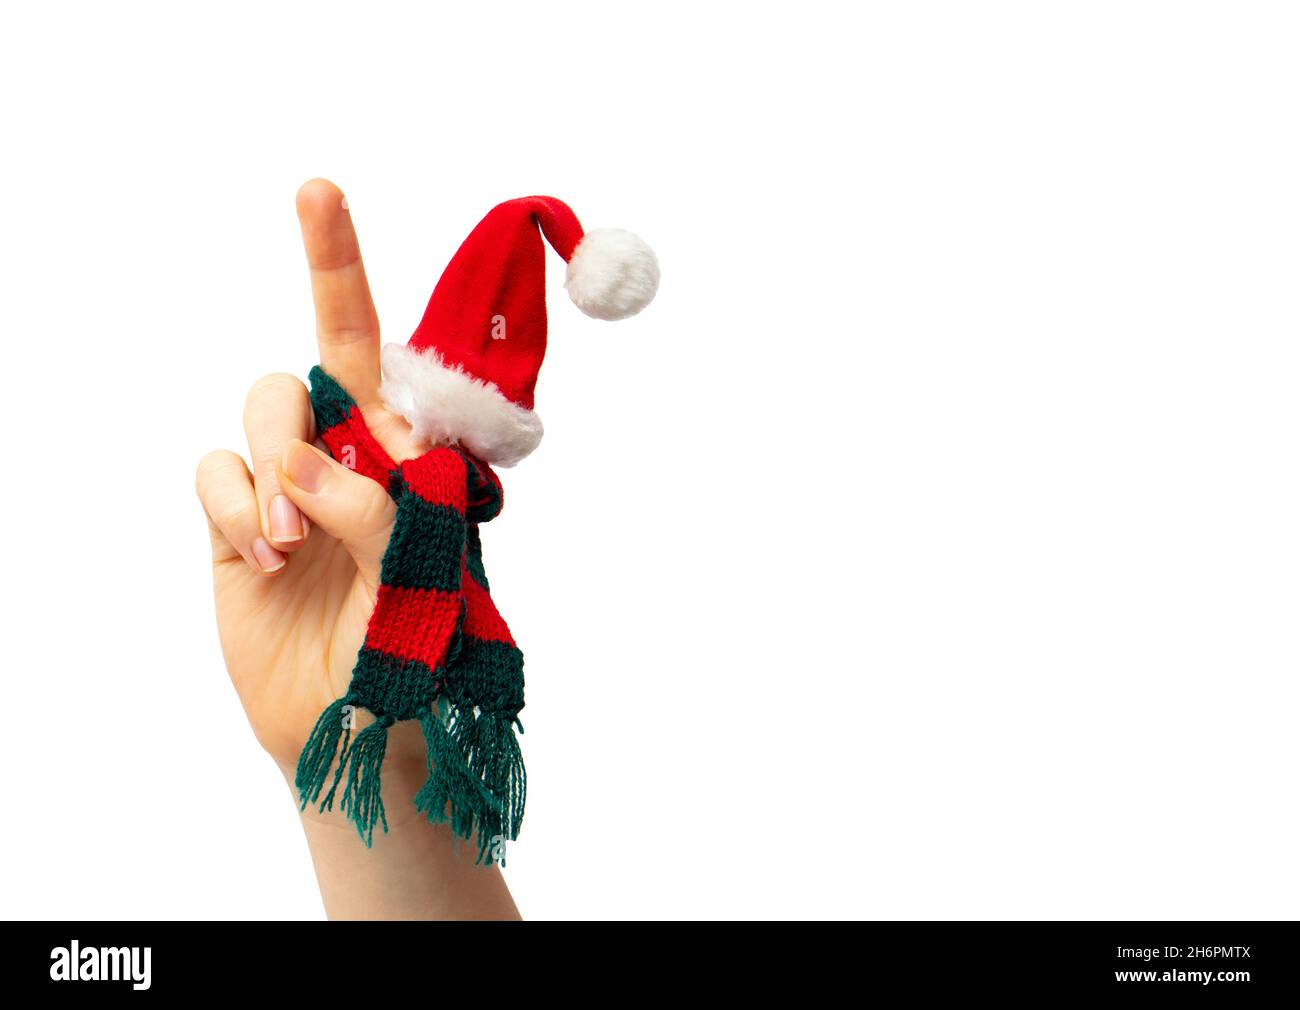 Close up view of isolated person hand show peace gesture, while wearing Christmas hat and knitted red and green scarf. Lot of copy space. Stock Photo